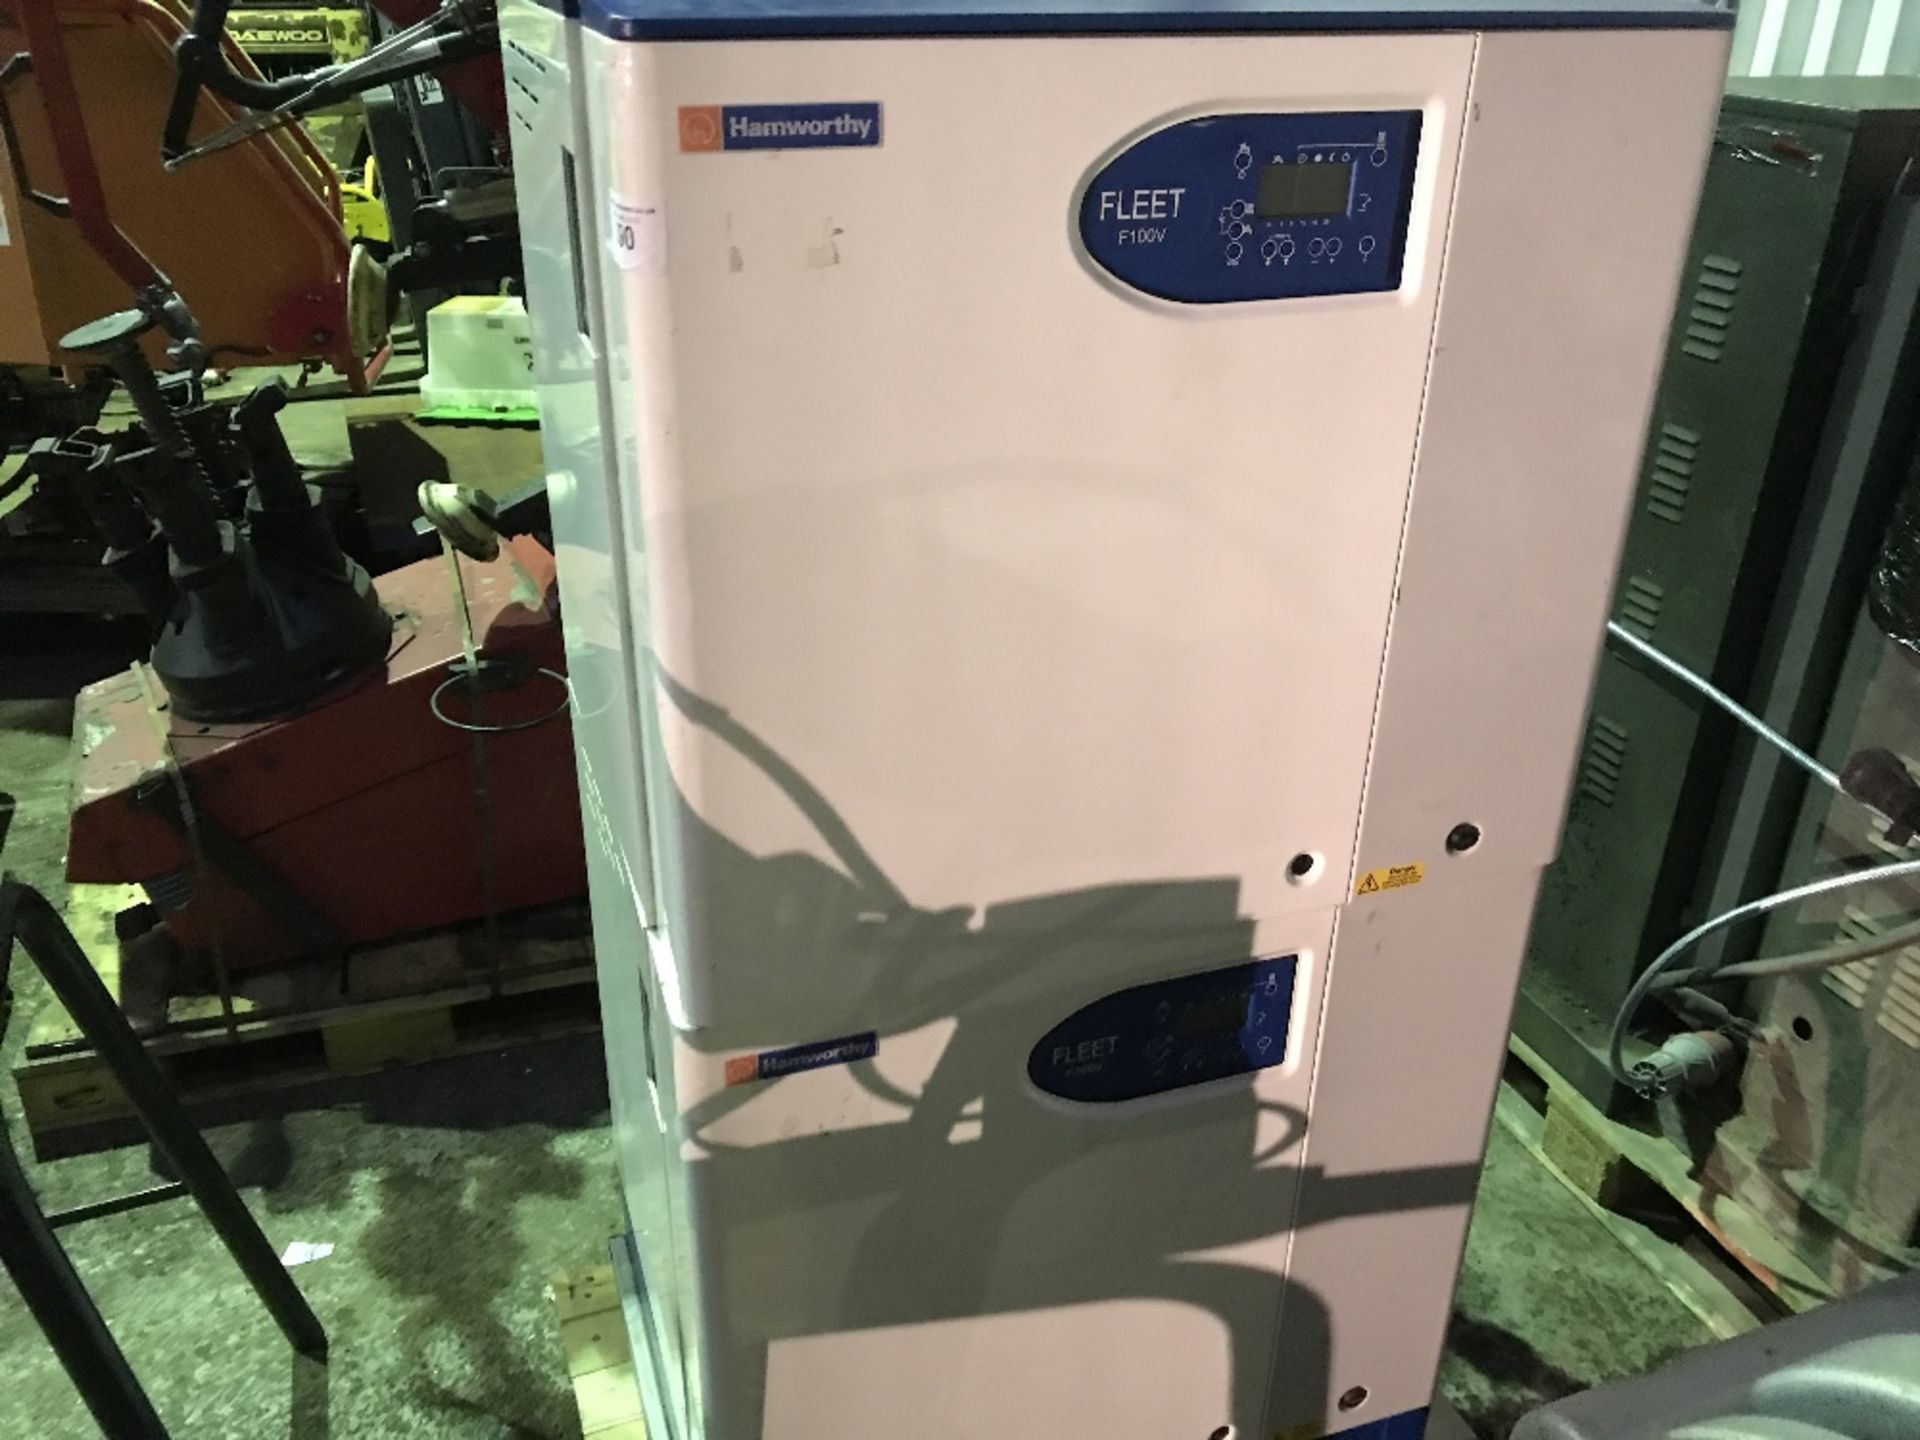 HAMWORTHY FLEET 100V TWO PART BOILER UNIT, USED FOR TESTING PURPOSES DIRECT FROM PIPE WORK/